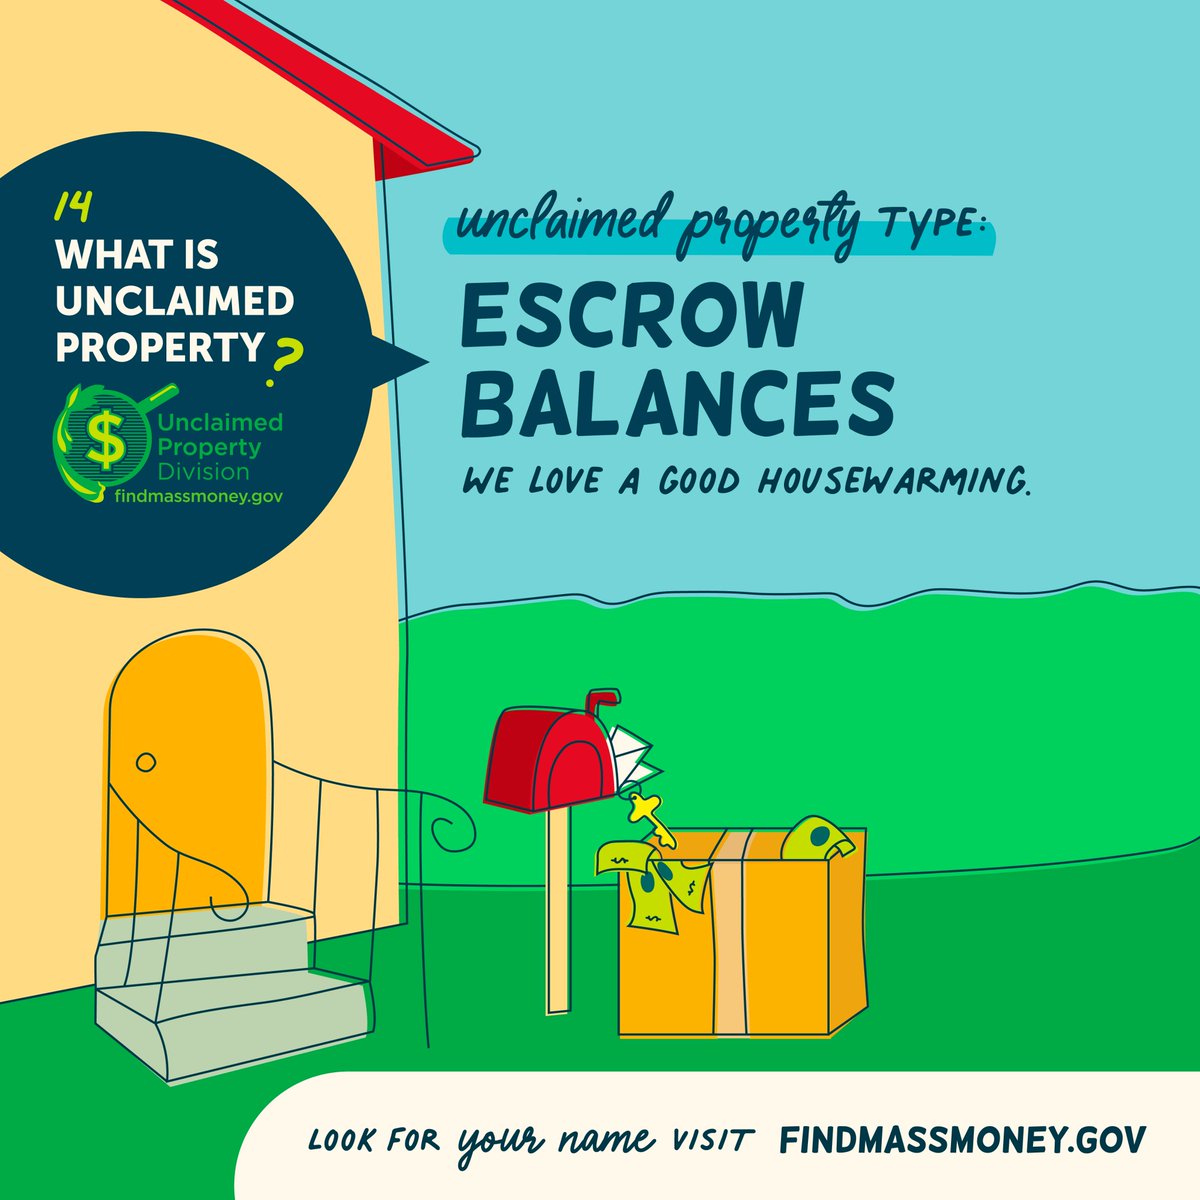 In buying a new property, there's a flurry of paperwork and transactions. Often escrow balances get lost in the shuffle and end up with us for safe keeping. Maybe you have an escrow overage waiting for you -- find out at findmassmoney.gov.